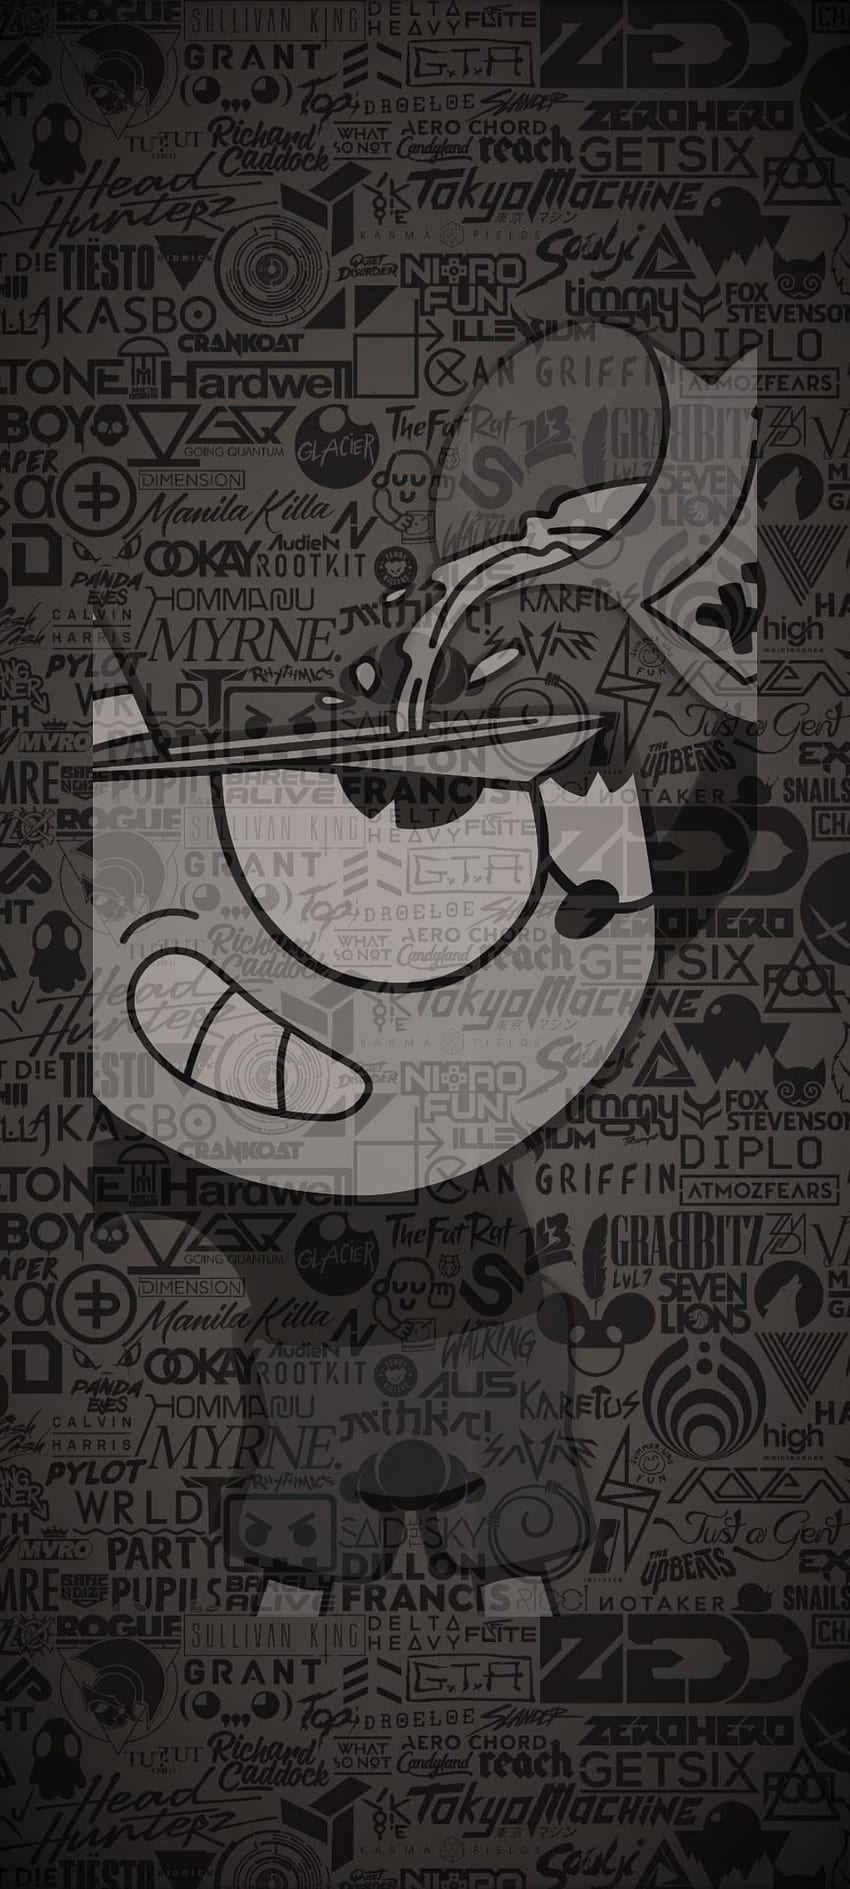 Download Cuphead wallpapers for mobile phone free Cuphead HD pictures